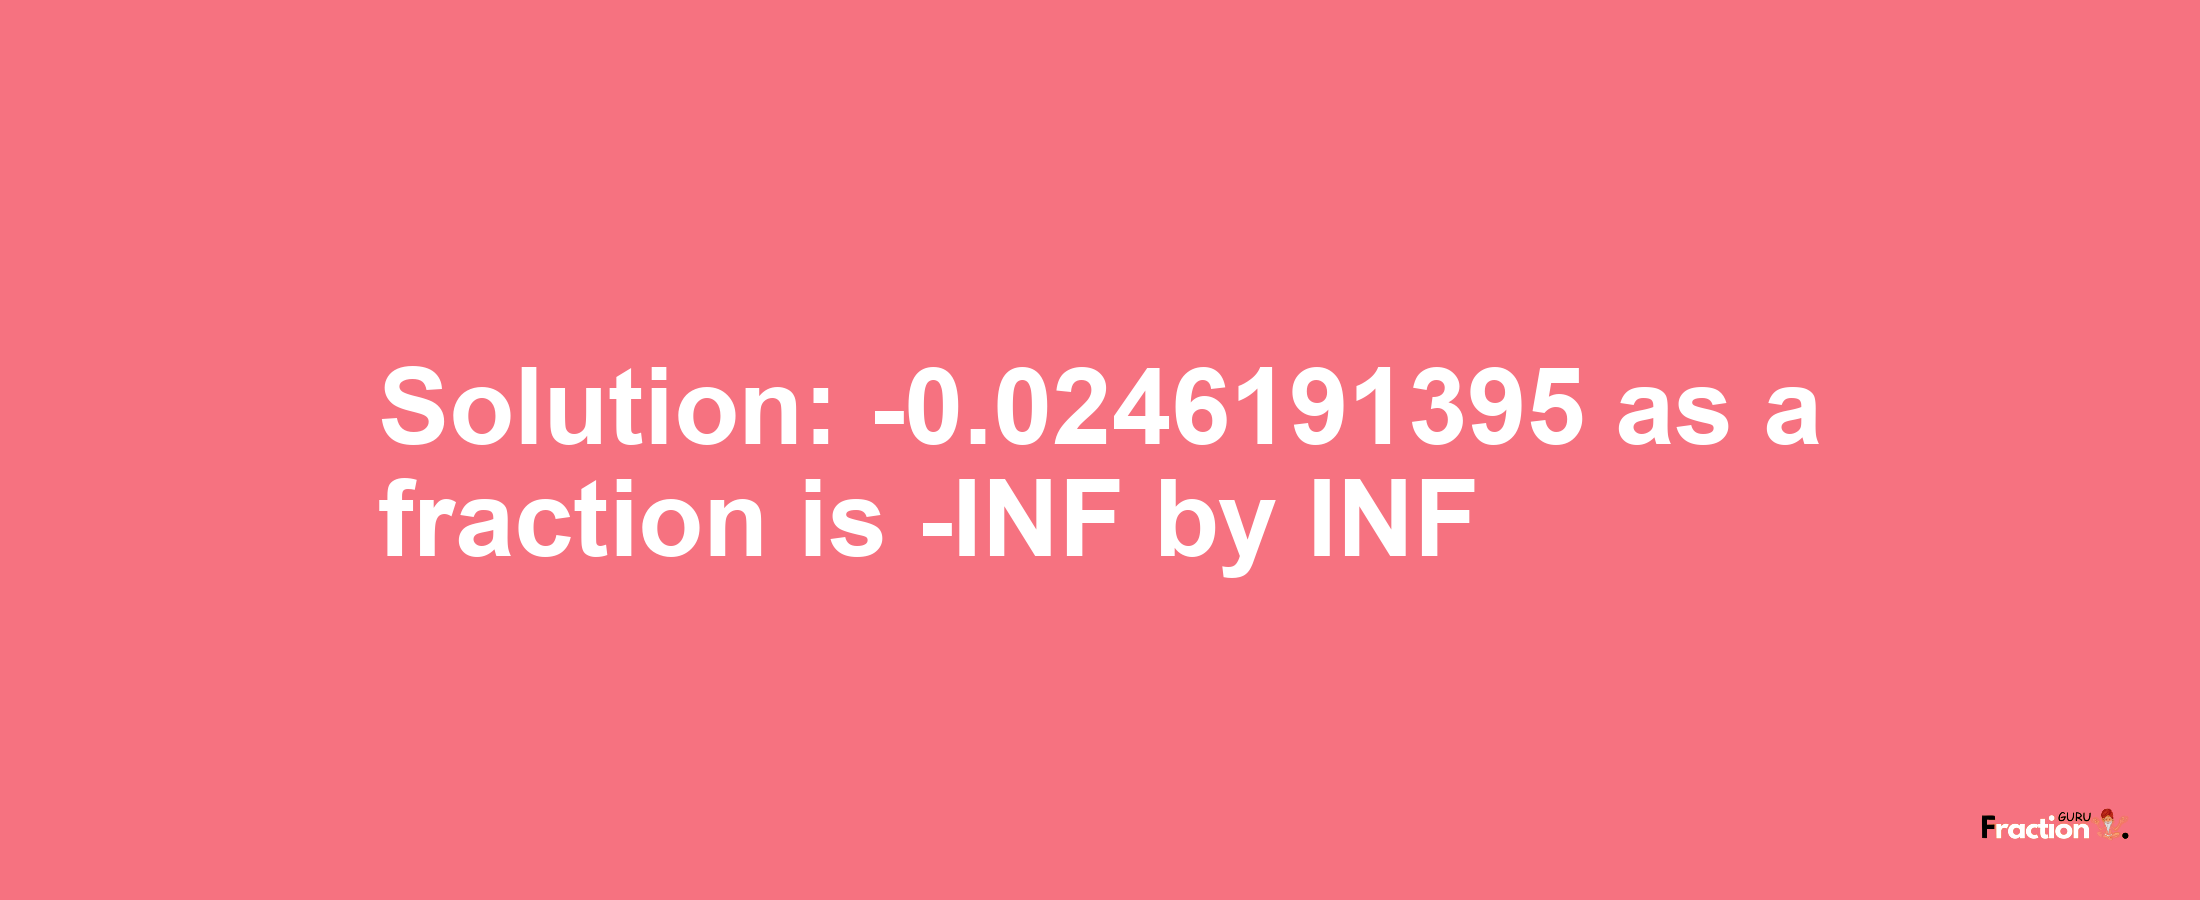 Solution:-0.0246191395 as a fraction is -INF/INF